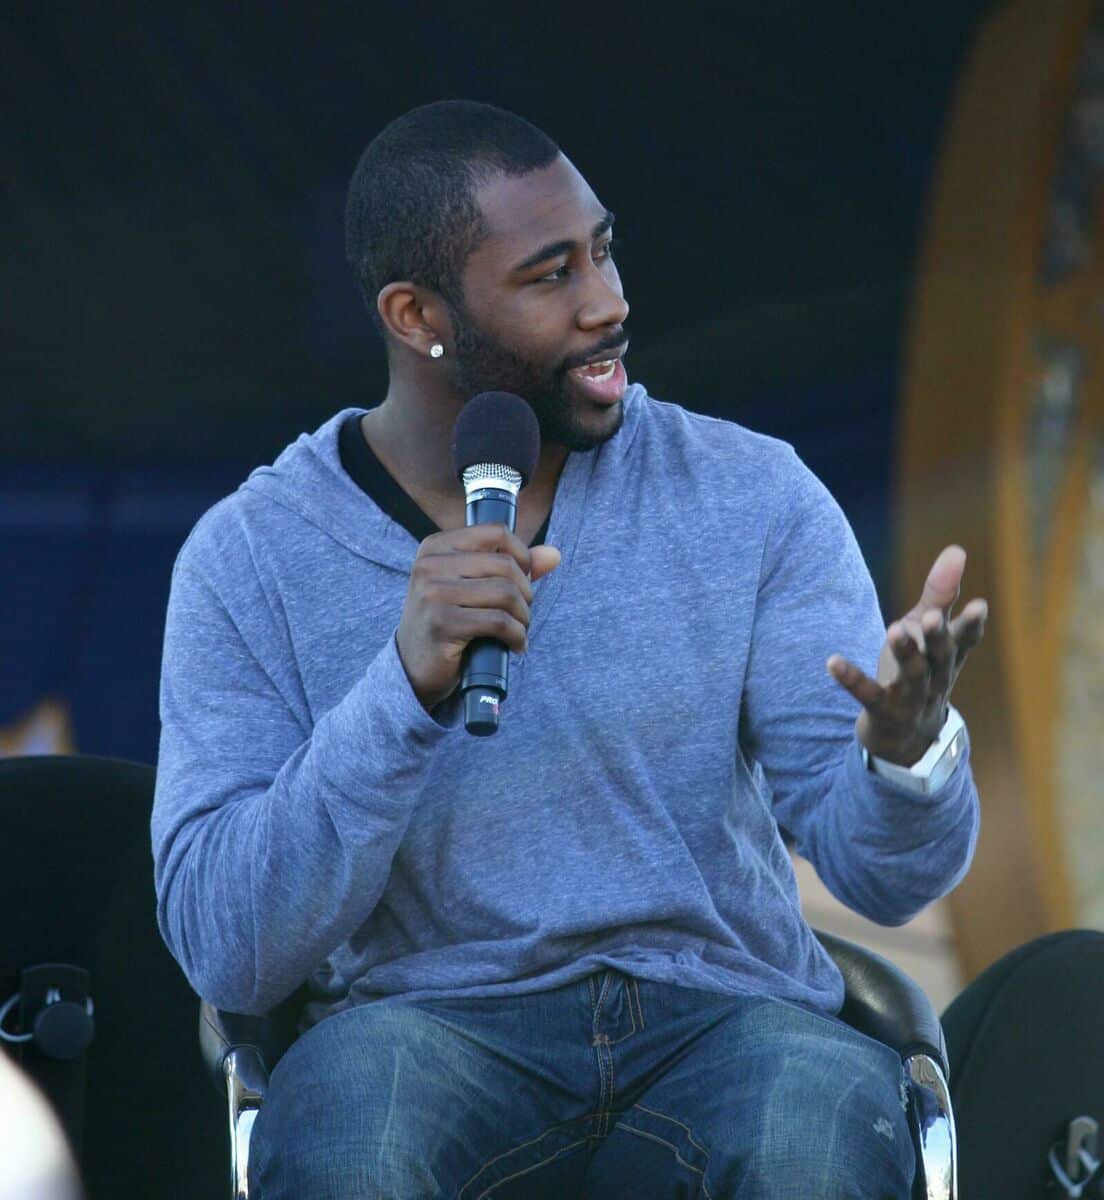 Darrelle Revis - Famous American Football Player